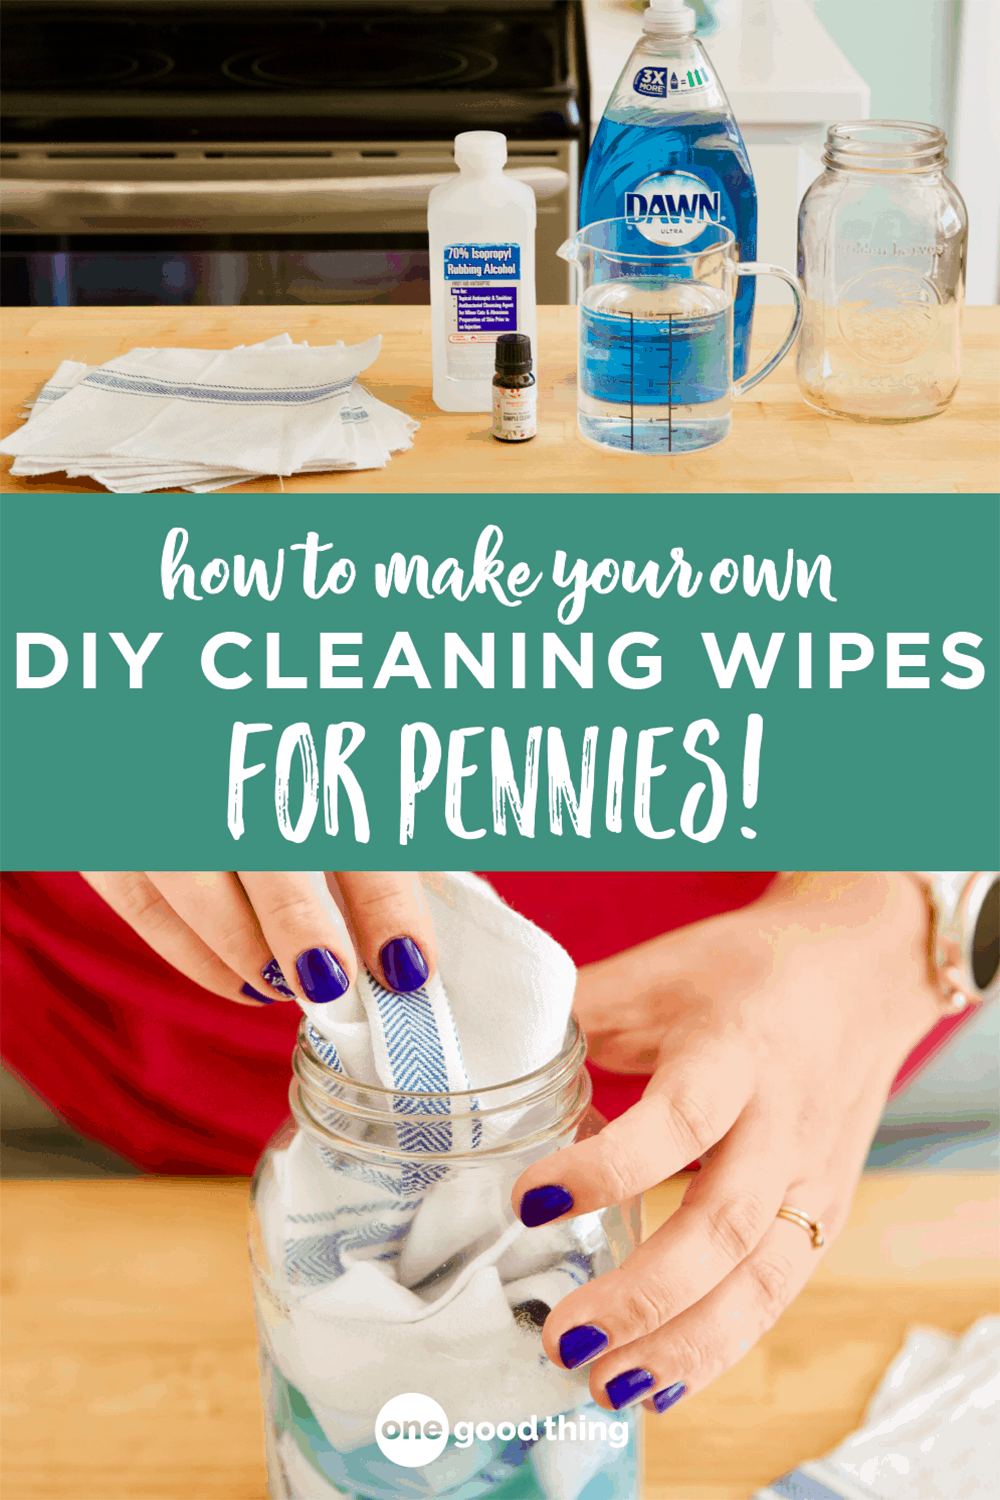 How To Make Your Own DIY Cleaning Wipes • One Good Thing by Jillee -   15 diy projects Organizing cleaning tips ideas